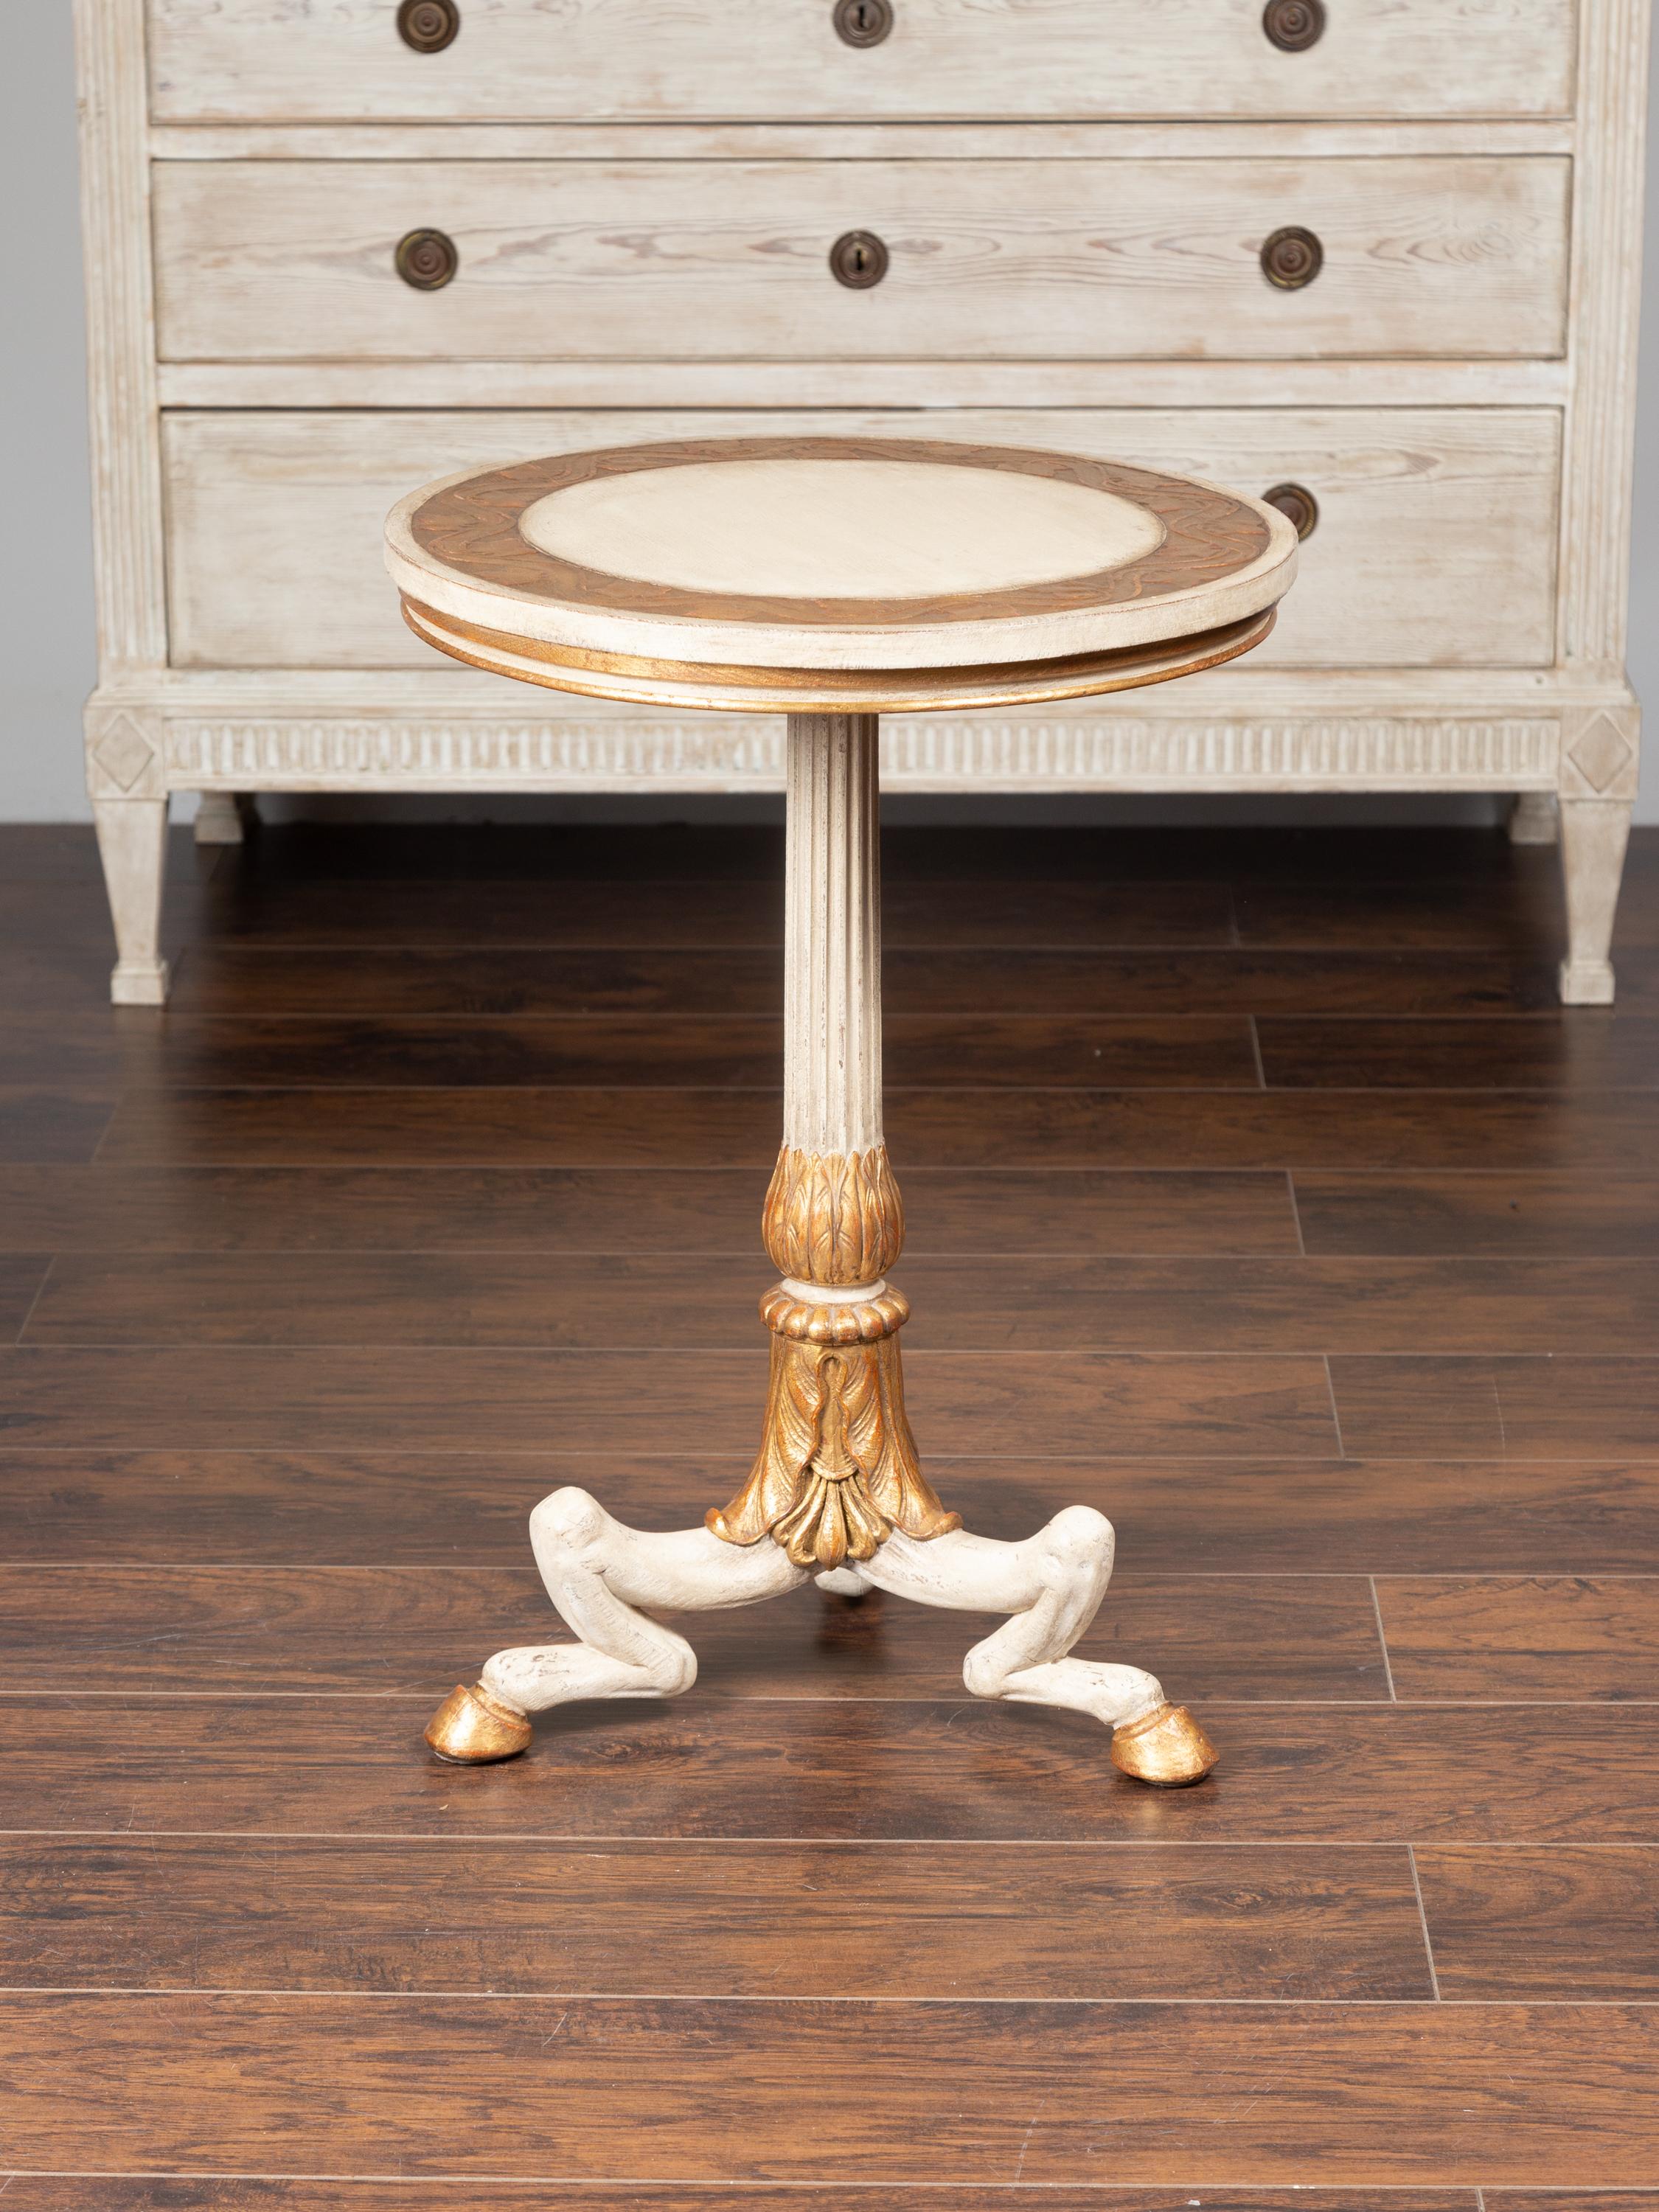 Italian 1930s Painted Wood Guéridon Table with Gilt Accents and Hoofed Feet For Sale 5